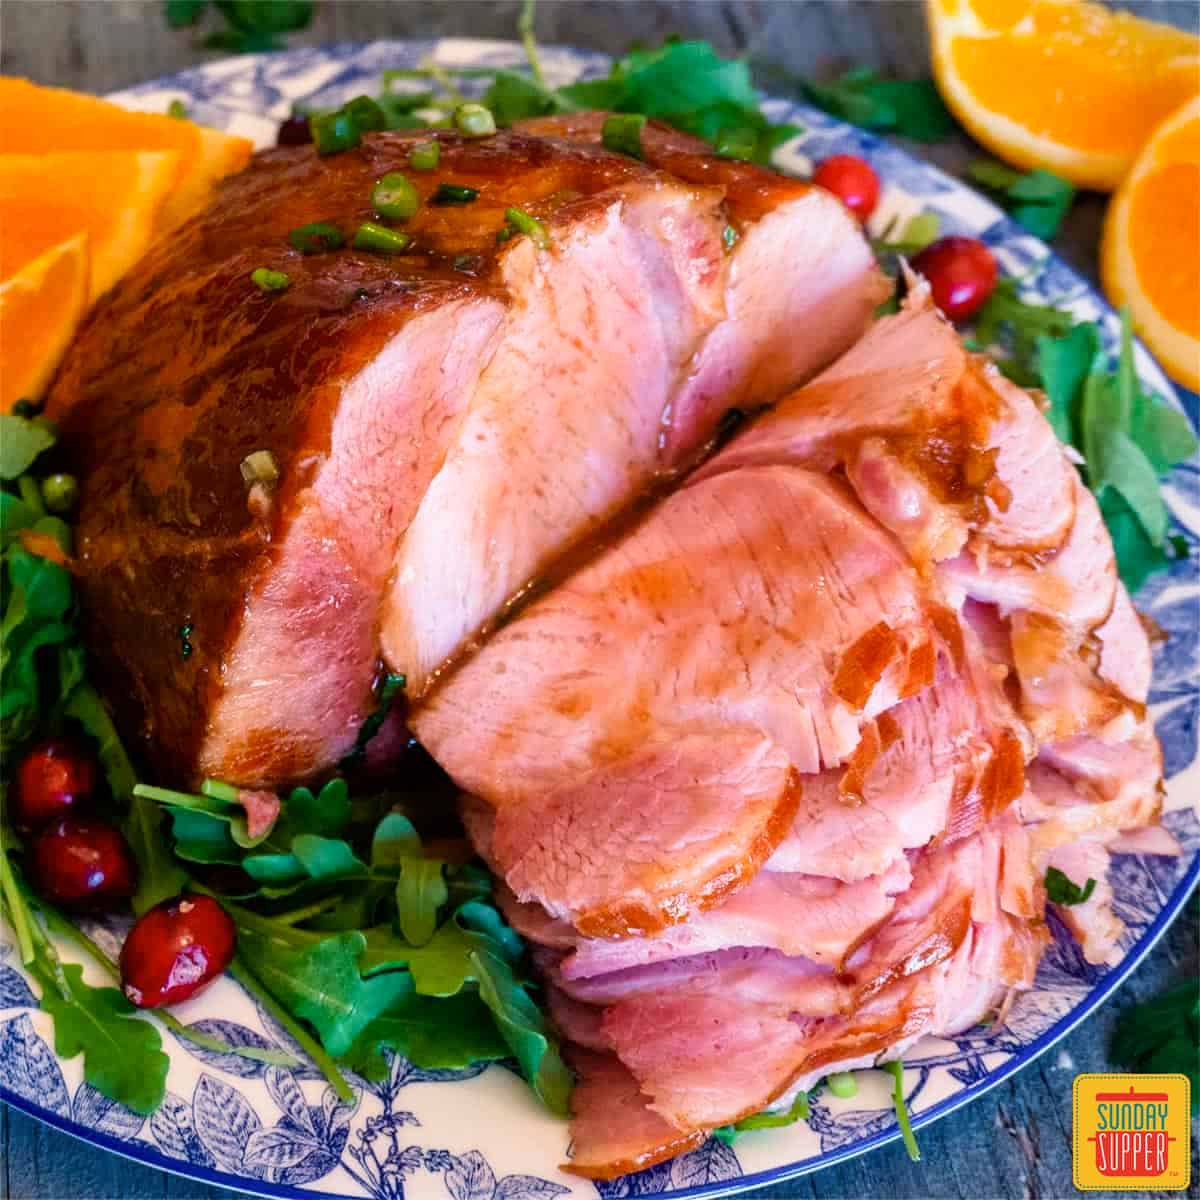 Close up of honey glazed ham slices with greens and oranges